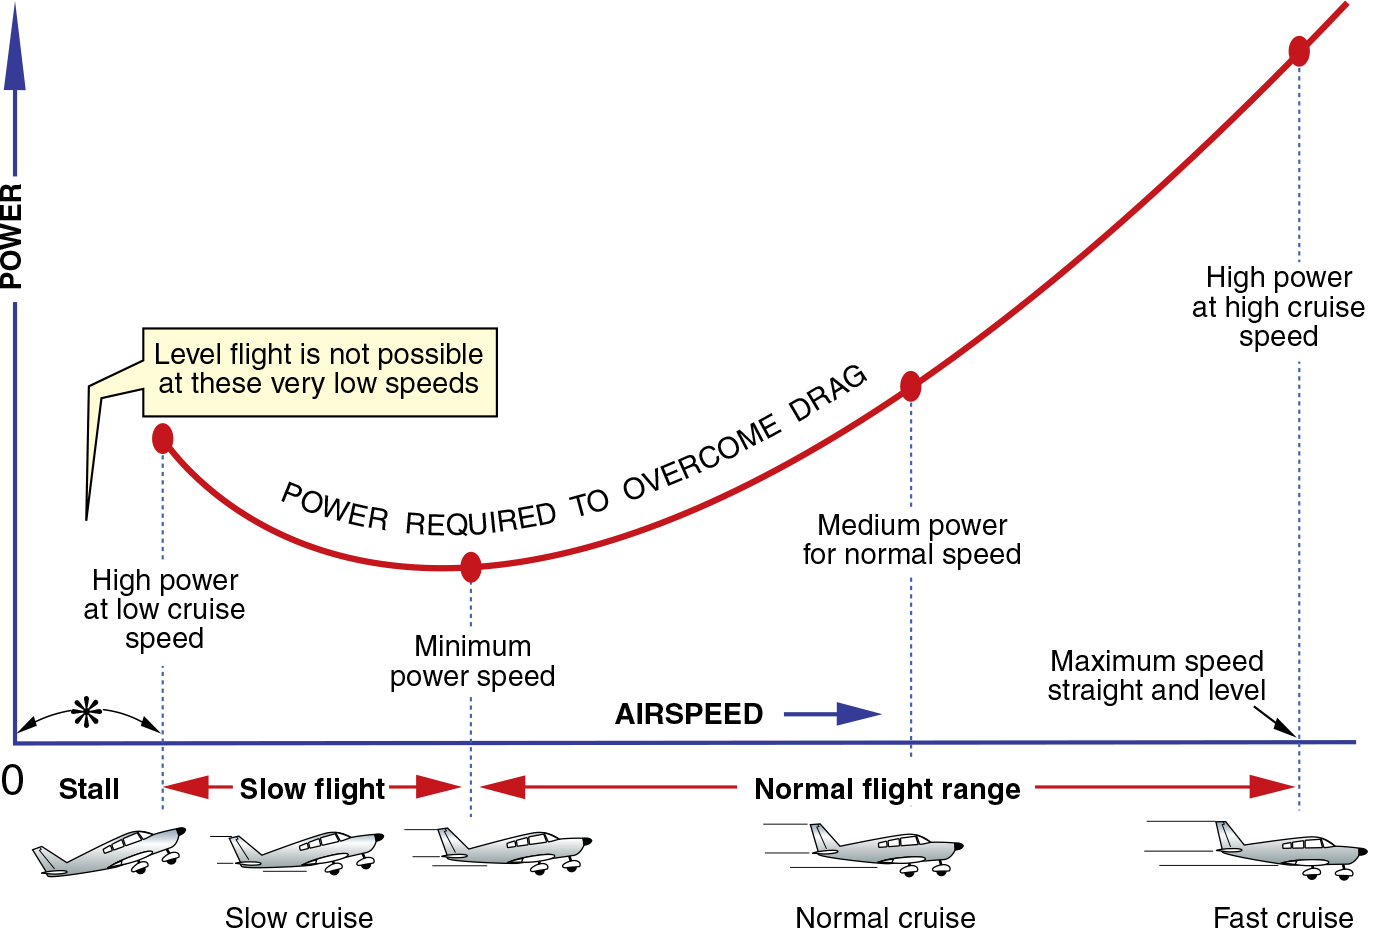 Aircraft Performance: Changing Airspeed in Straight-and-Level